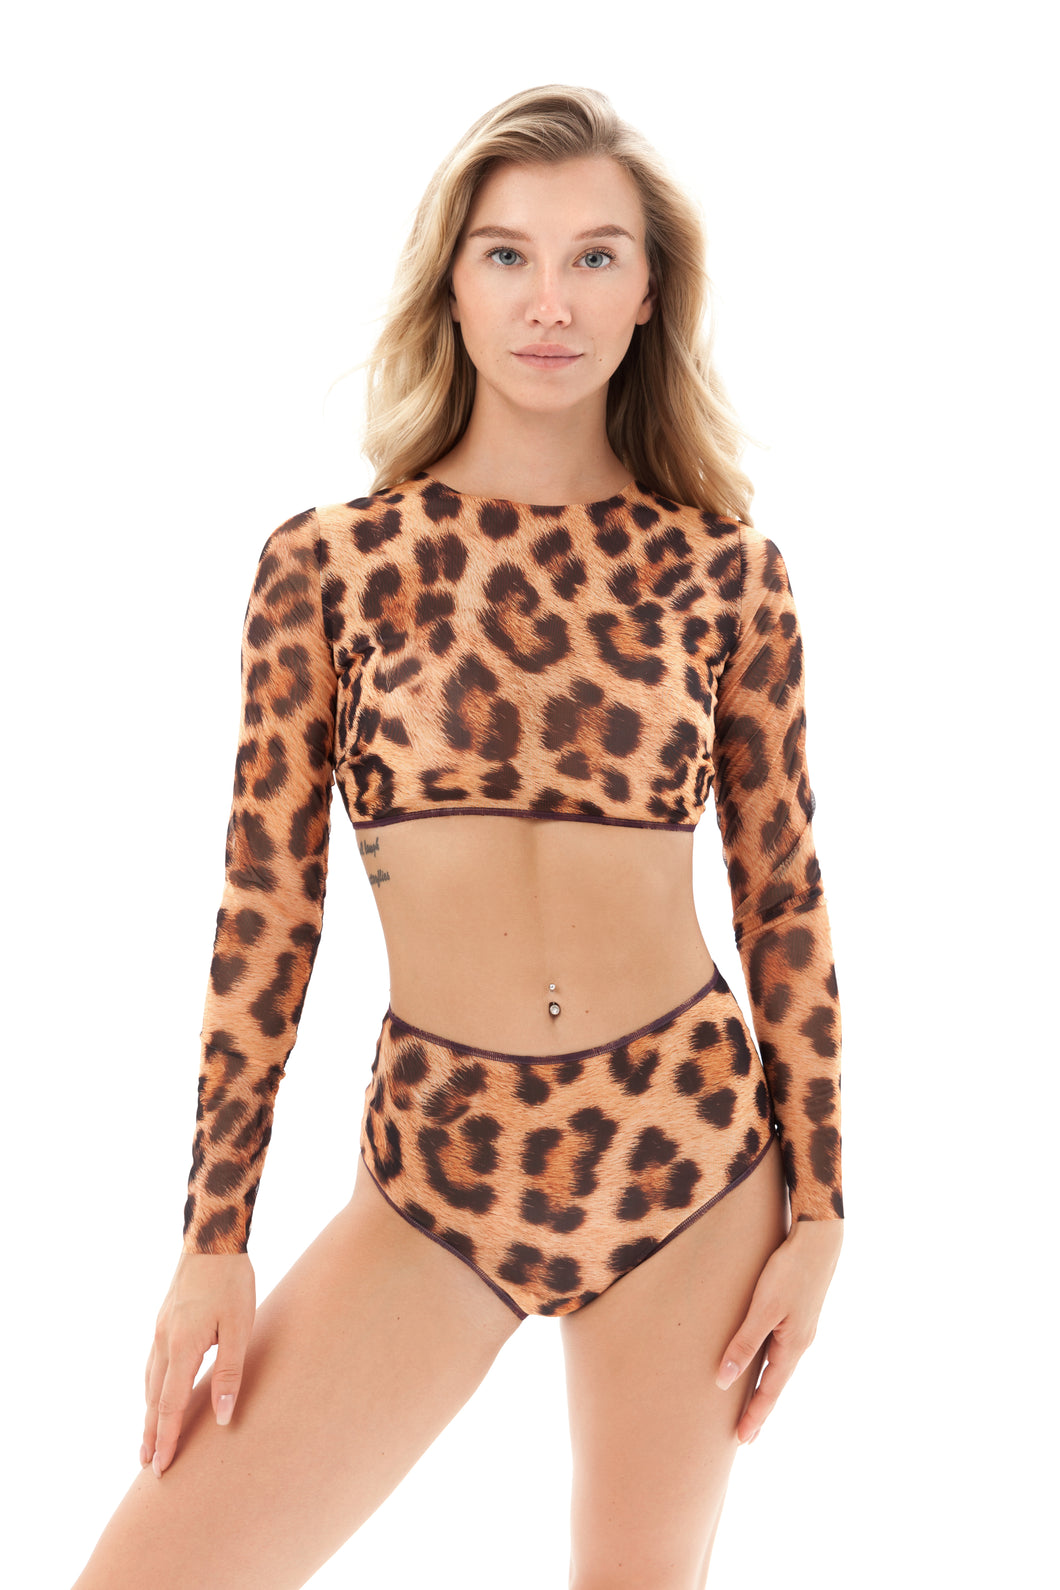 Explore tan-through innovative smart swimsuits adorned with the iconic leopard print in this file. Featuring a two-piece design, including a swim top with sleeves, perfect for runway-inspired vacation looks